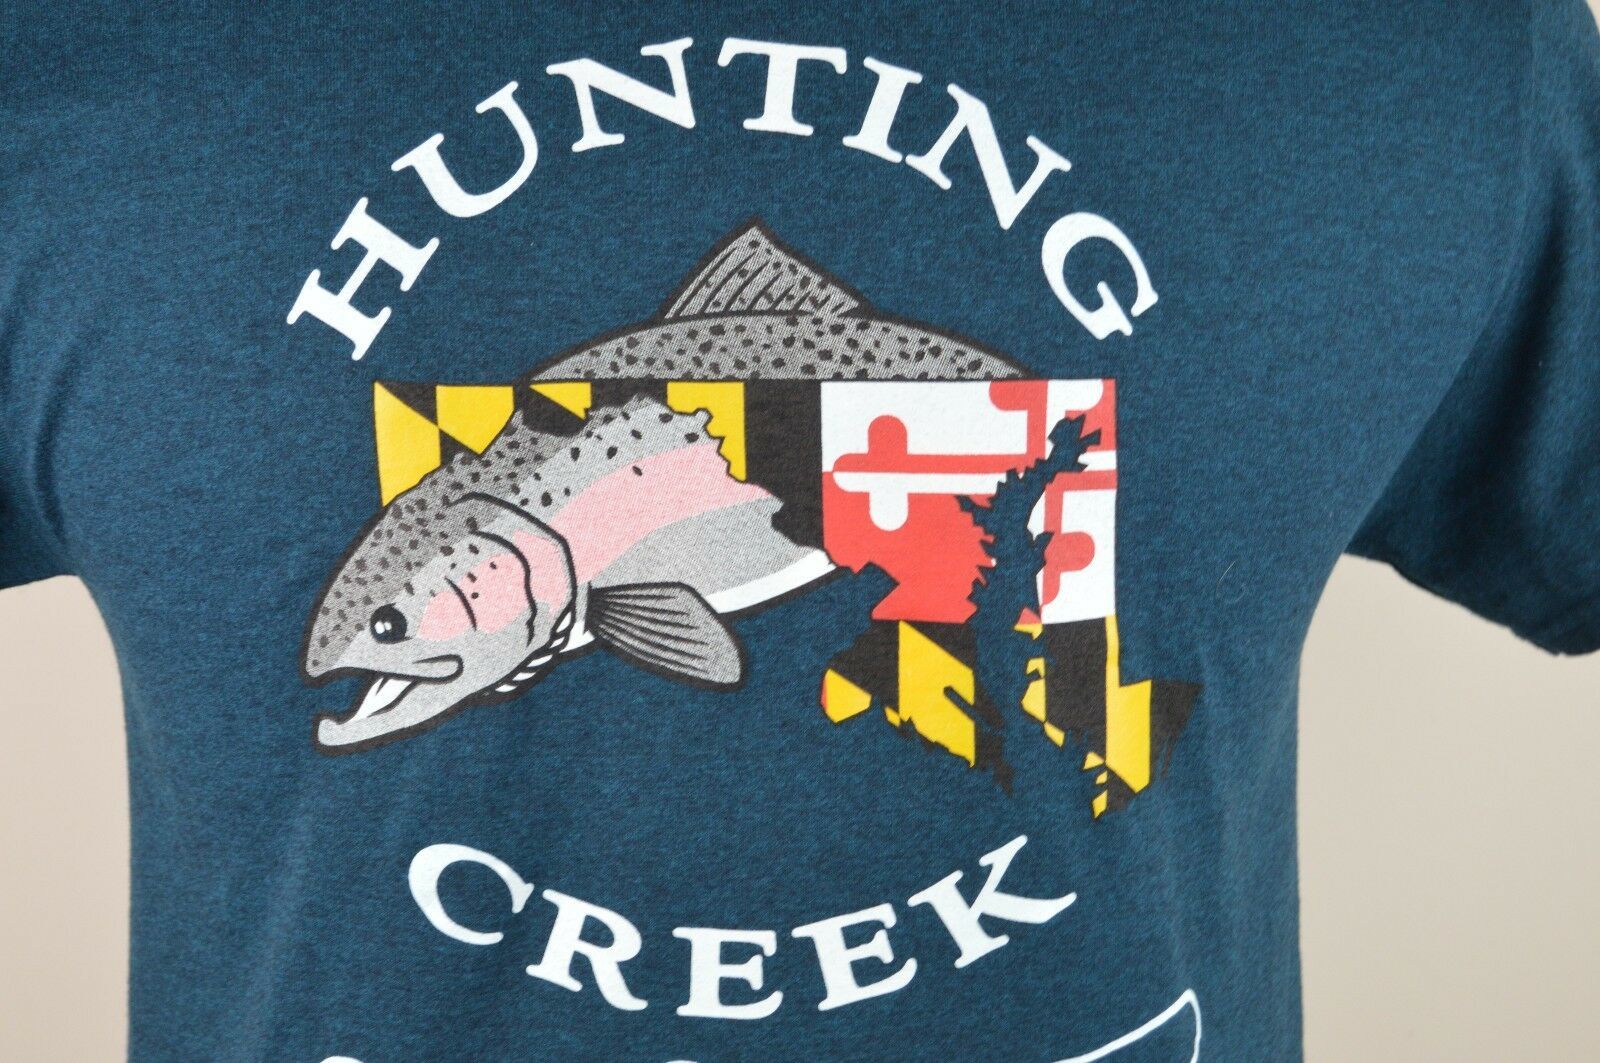 Primary image for Hunting Creek Outfitters Frederick Maryland Salmon Fishing Teal Blue T Shirt M